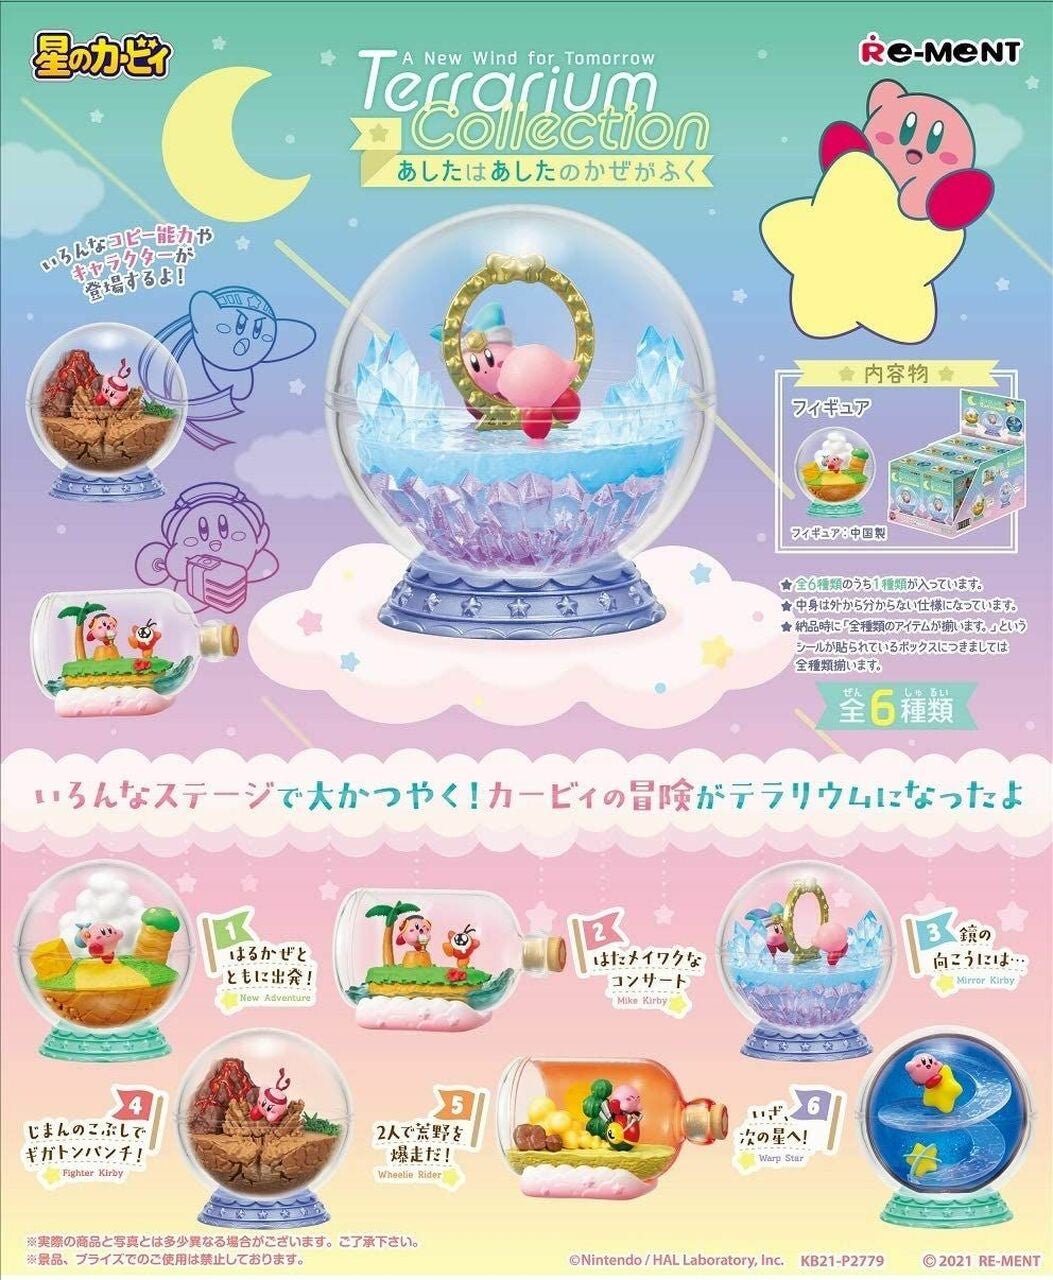 Re-ment Kirby Terrarium Collection: A New Wind for Tomorrow (1 Random Blind Box)